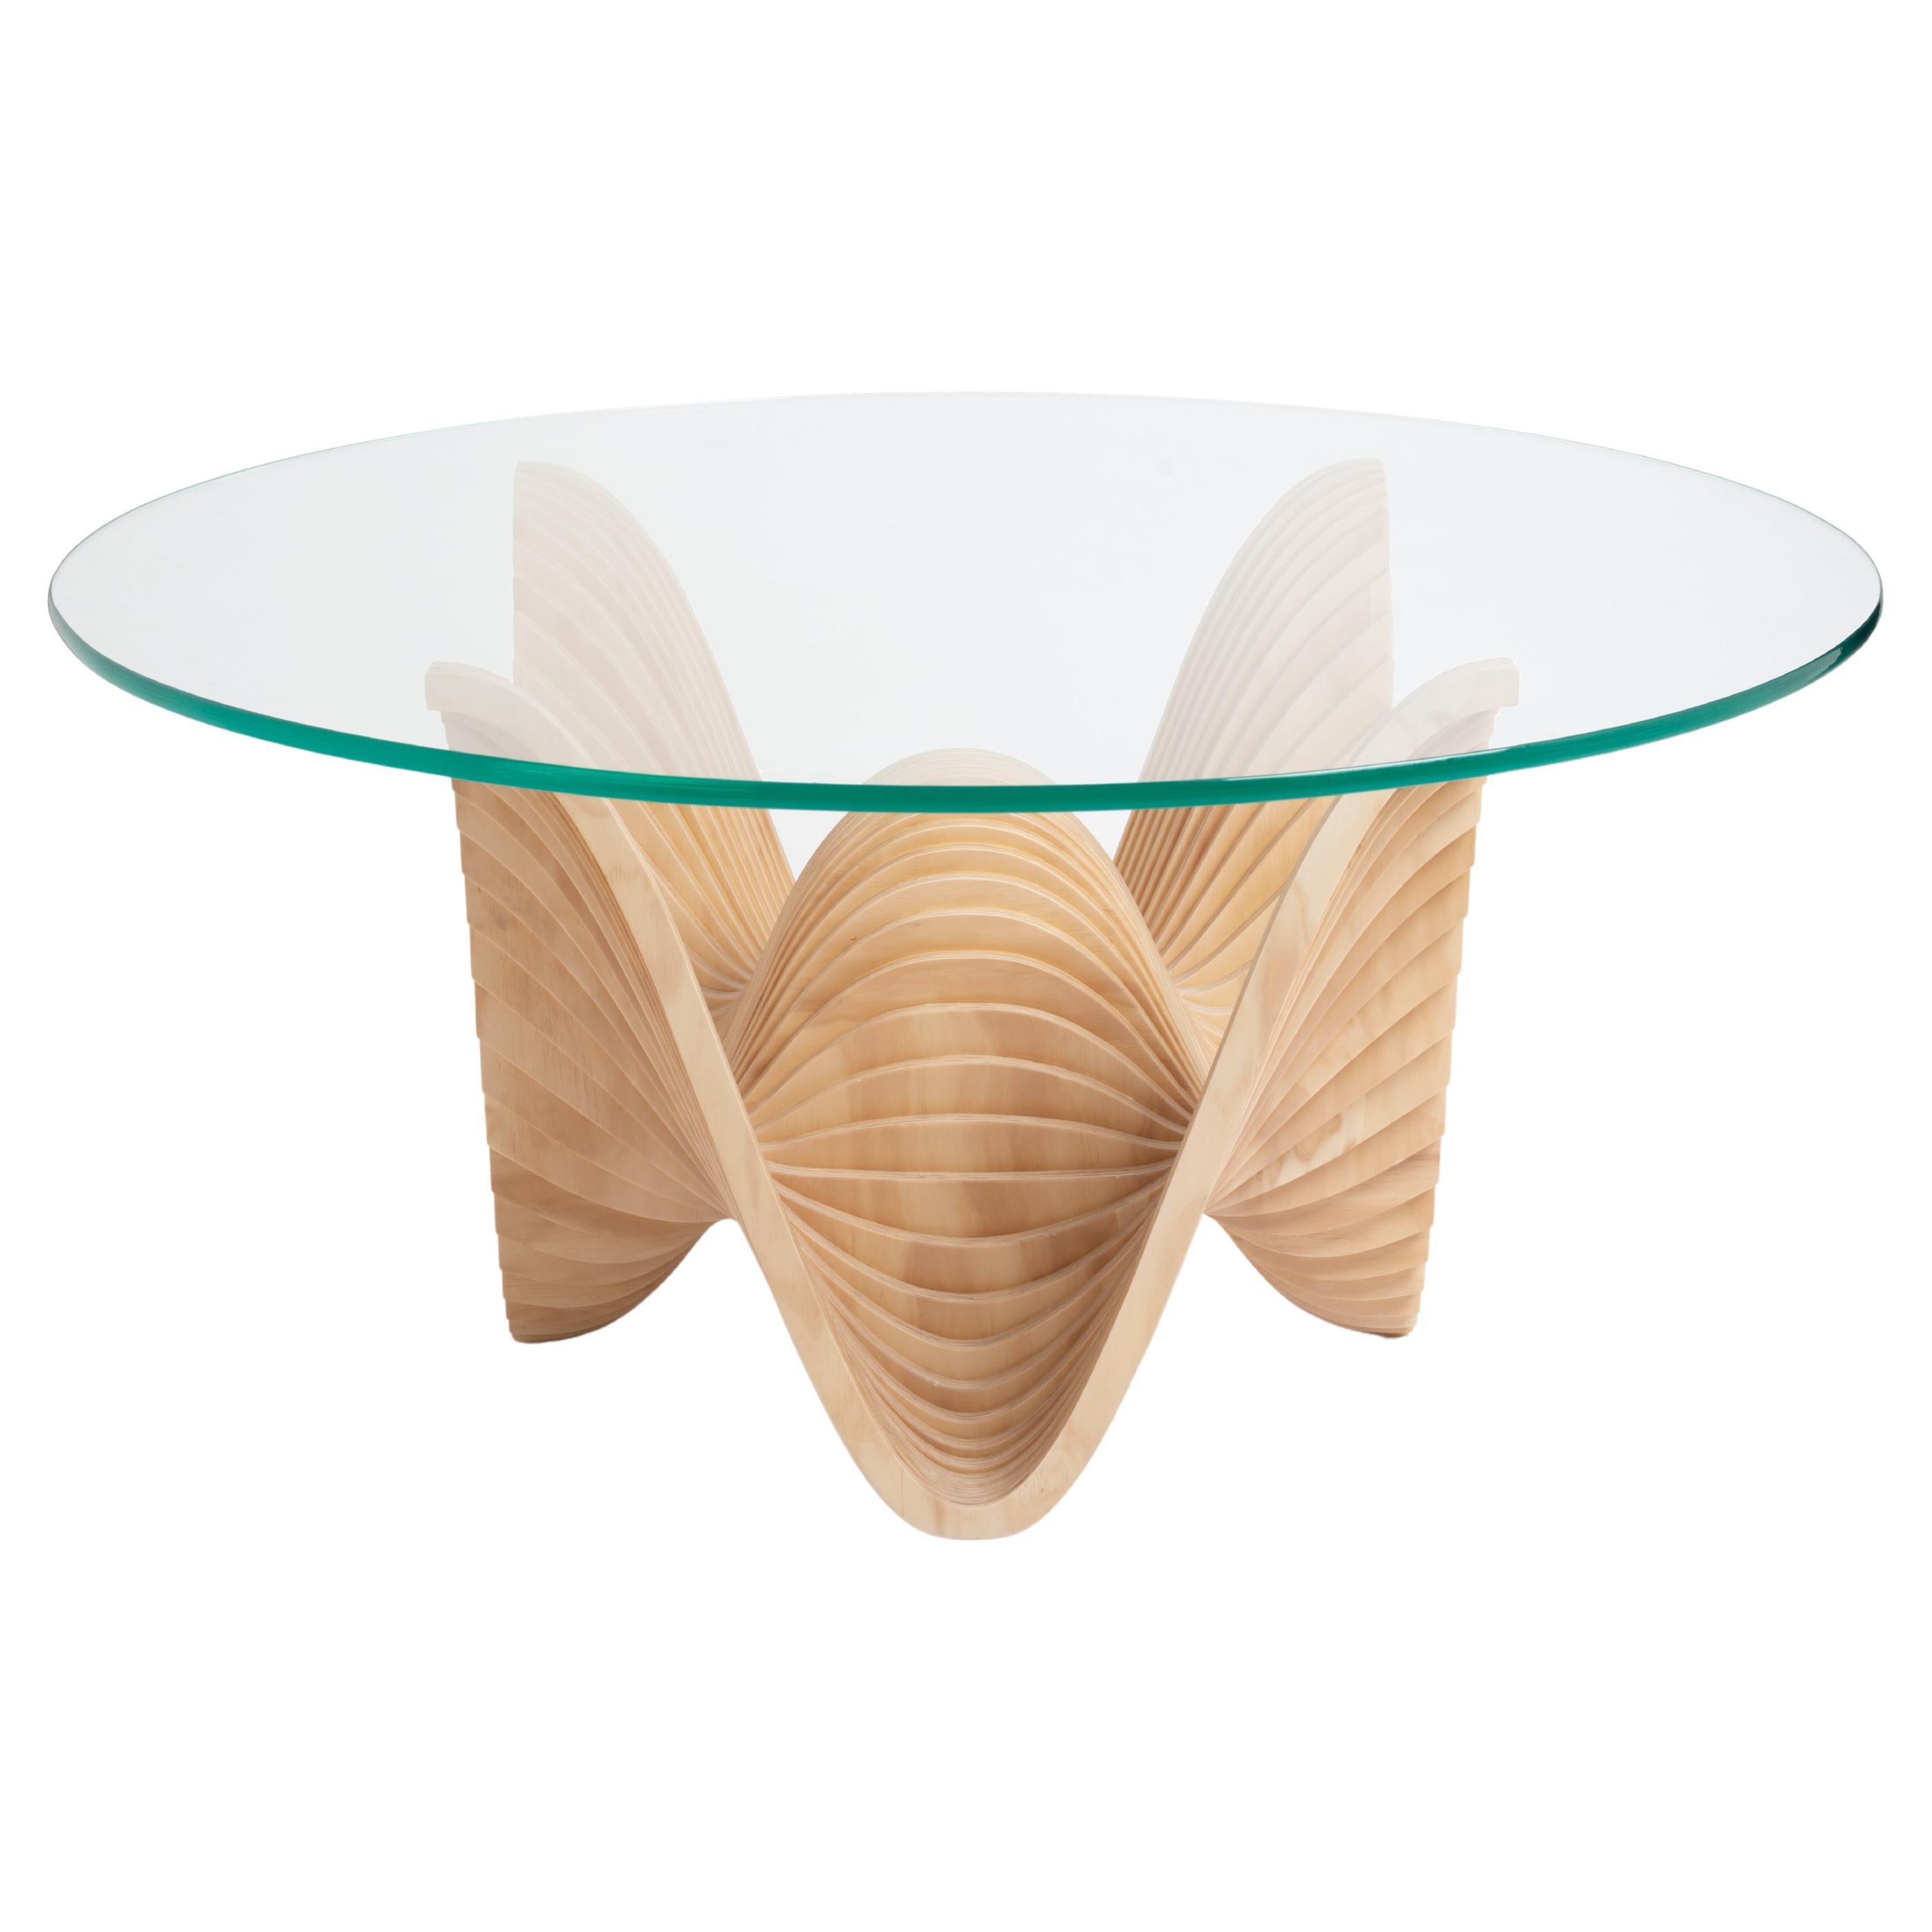 Candy Dining Table Medium by Piegatto, une table contemporaine sculpturale